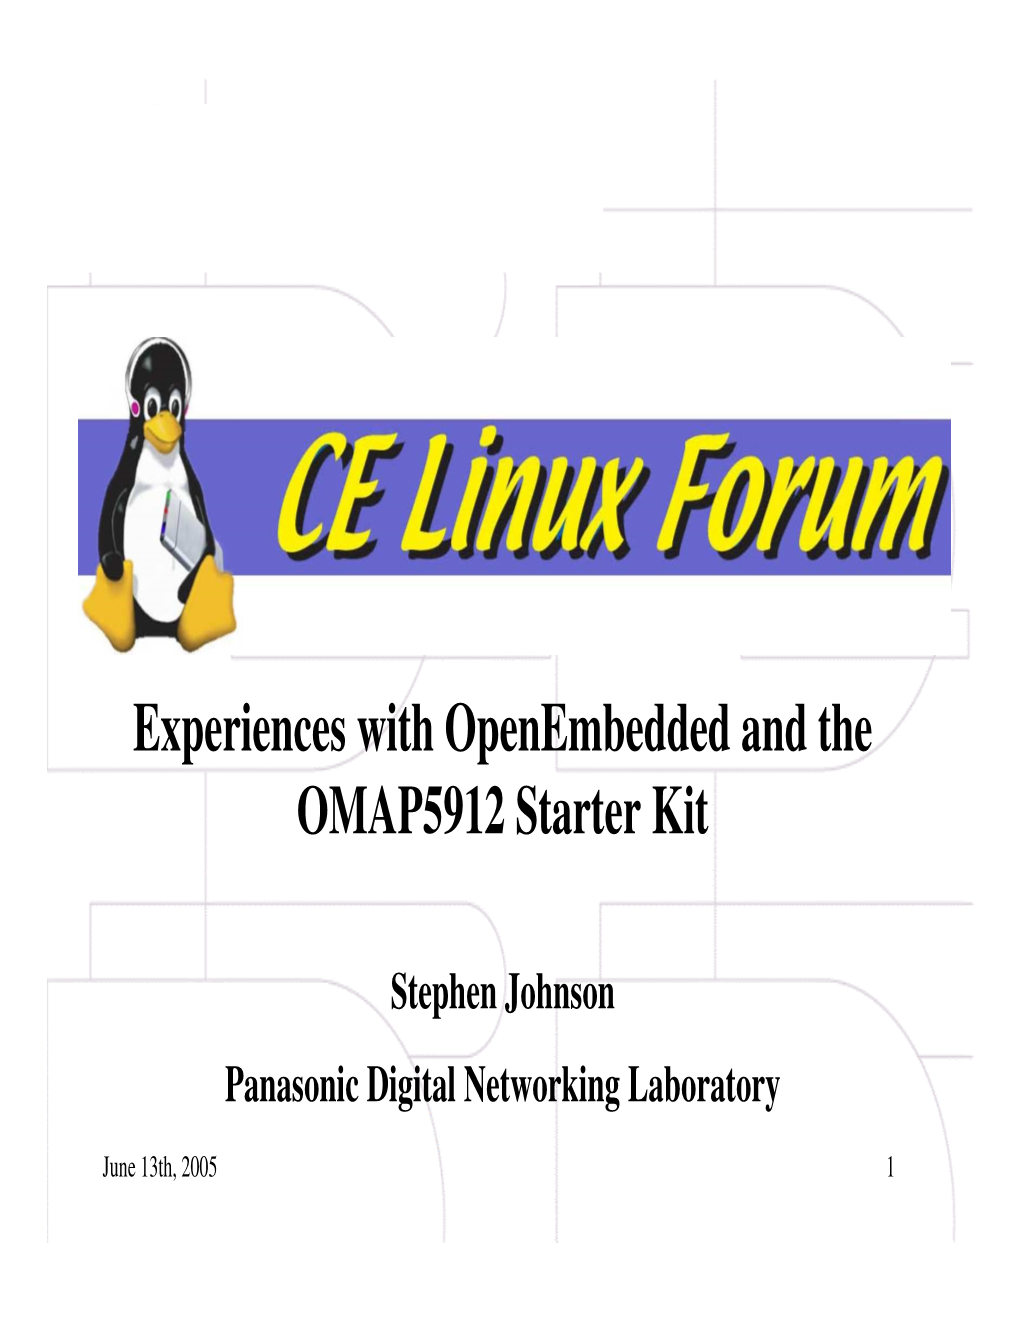 Experiences with Openembedded and the OMAP5912 Starter Kit